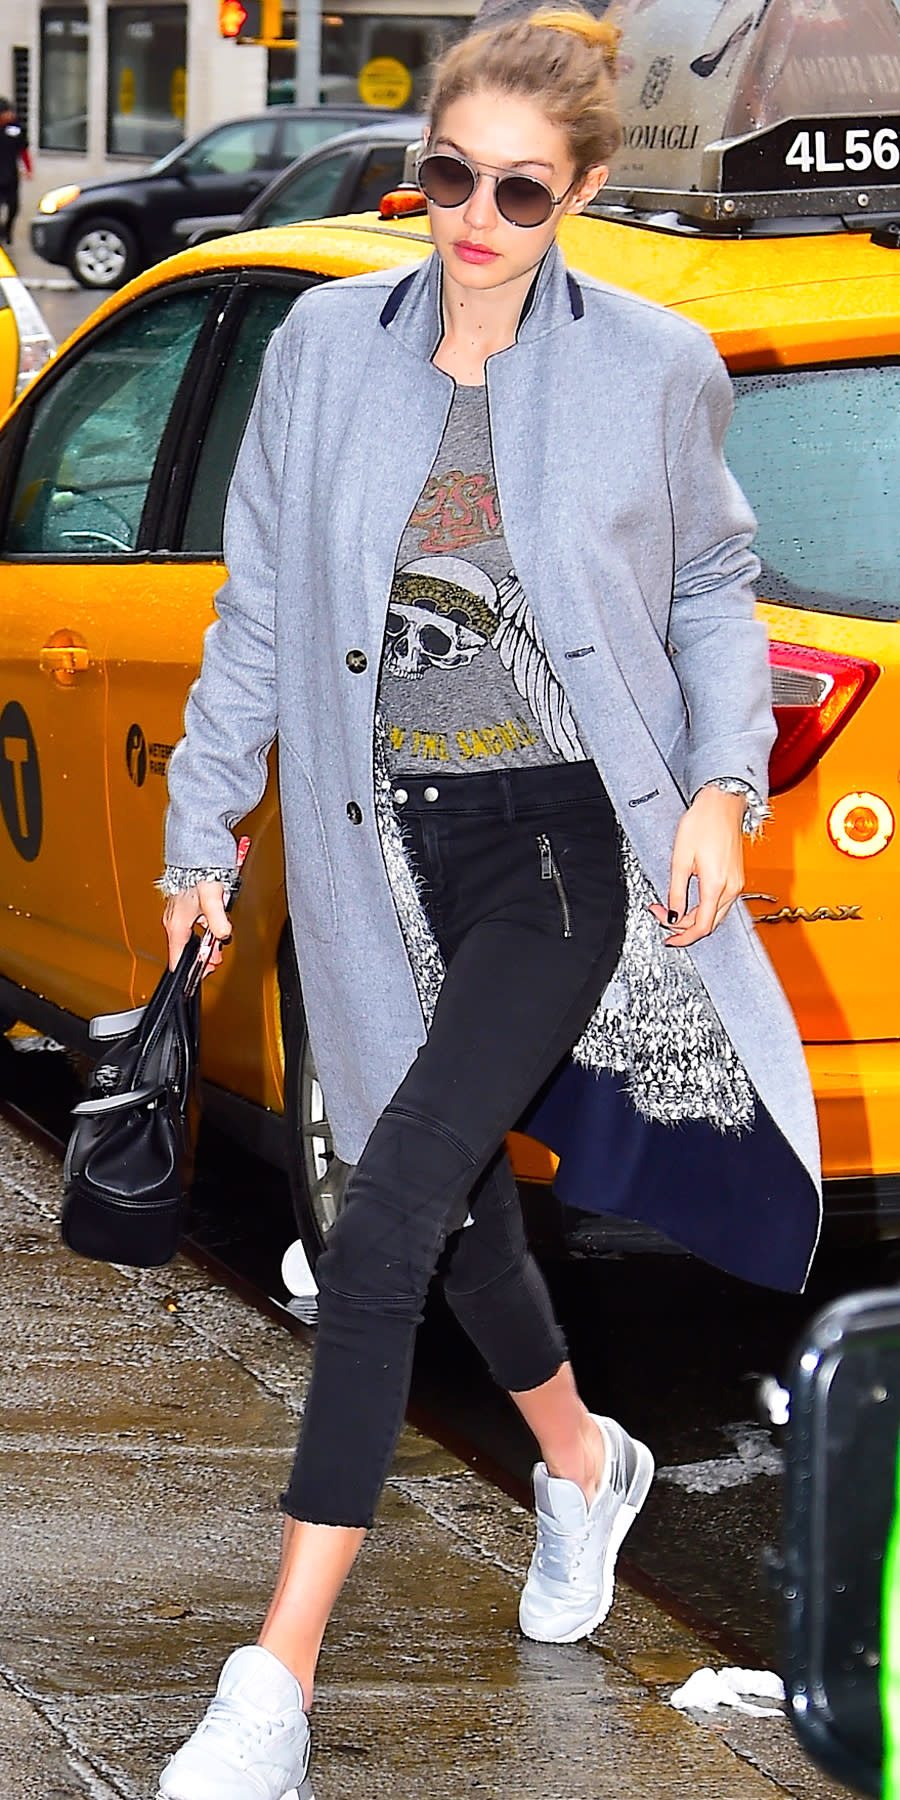 <p>Hadid doubled up on her layers for a chilly N.Y.C. day, wearing a long gray coat (get a similar one from <a rel="nofollow noopener" href="http://click.linksynergy.com/fs-bin/click?id=93xLBvPhAeE&subid=0&offerid=463275.1&type=10&tmpid=8157&RD_PARM1=http%253A%252F%252Fshop.nordstrom.com%252Fs%252Ftopshop-snap-button-three-quarter-coat%252F4490589%253Forigin%253Dcategory-personalizedsort%2526fashioncolor%253DGREY&u1=ISNewsGigiHStreetStyle1.24JA" target="_blank" data-ylk="slk:Topshop;elm:context_link;itc:0;sec:content-canvas" class="link ">Topshop</a>) over a fuzzy gray cardigan from B Collection by Bobeau ($158; <a rel="nofollow noopener" href="http://click.linksynergy.com/fs-bin/click?id=93xLBvPhAeE&subid=0&offerid=465536.1&type=10&tmpid=2425&RD_PARM1=http%3A%2F%2Fwww1.bloomingdales.com%2Fshop%2Fproduct%2Fb-collection-by-bobeau-harper-eyelash-knit-cardigan%3FID%3D1865195%2526CategoryID%3D2910%2526linkModule%3D1&u1=ISNewsGigiHadidStreetStyle1.27JA" target="_blank" data-ylk="slk:bloomingdales.com;elm:context_link;itc:0;sec:content-canvas" class="link ">bloomingdales.com</a>), a vintage Lauren Moshi rocker tee, moto-style dark wash DL1961 jeans ($136; <a rel="nofollow noopener" href="https://infinitycreativeagency-dot-yamm-track.appspot.com/Redirect?ukey=10uYjtY5hQ8sg9tZZeBordG-NGcuebIs33C7rnbW8vsY-0&key=YAMMID-01566650&link=http%3A%2F%2Fwww.revolve.com%2Fdl1961-x-jessica-alba-no-4-instasculpt-crop-moto-in-mirage%2Fdp%2FDL19-WJ271%2F%3Fd%3DF%26currency%3DUSD%26source%3Dgoogle%26mkwid%3D%257Bifsearch%3As%257D%257Bifcontent%3Ac%257D_dc%257Cpcrid%257C114237079571%257Cpkw%257C%257Cpmt%257C%26pdv%3Dc%26matchtype%3D%26gclid%3DCK6l3PT129ECFQ9EfgodMIcN0g" target="_blank" data-ylk="slk:revolve.com;elm:context_link;itc:0;sec:content-canvas" class="link ">revolve.com</a>), and white sneakers. The model accessorized with round sunglasses and a structured black purse. </p>